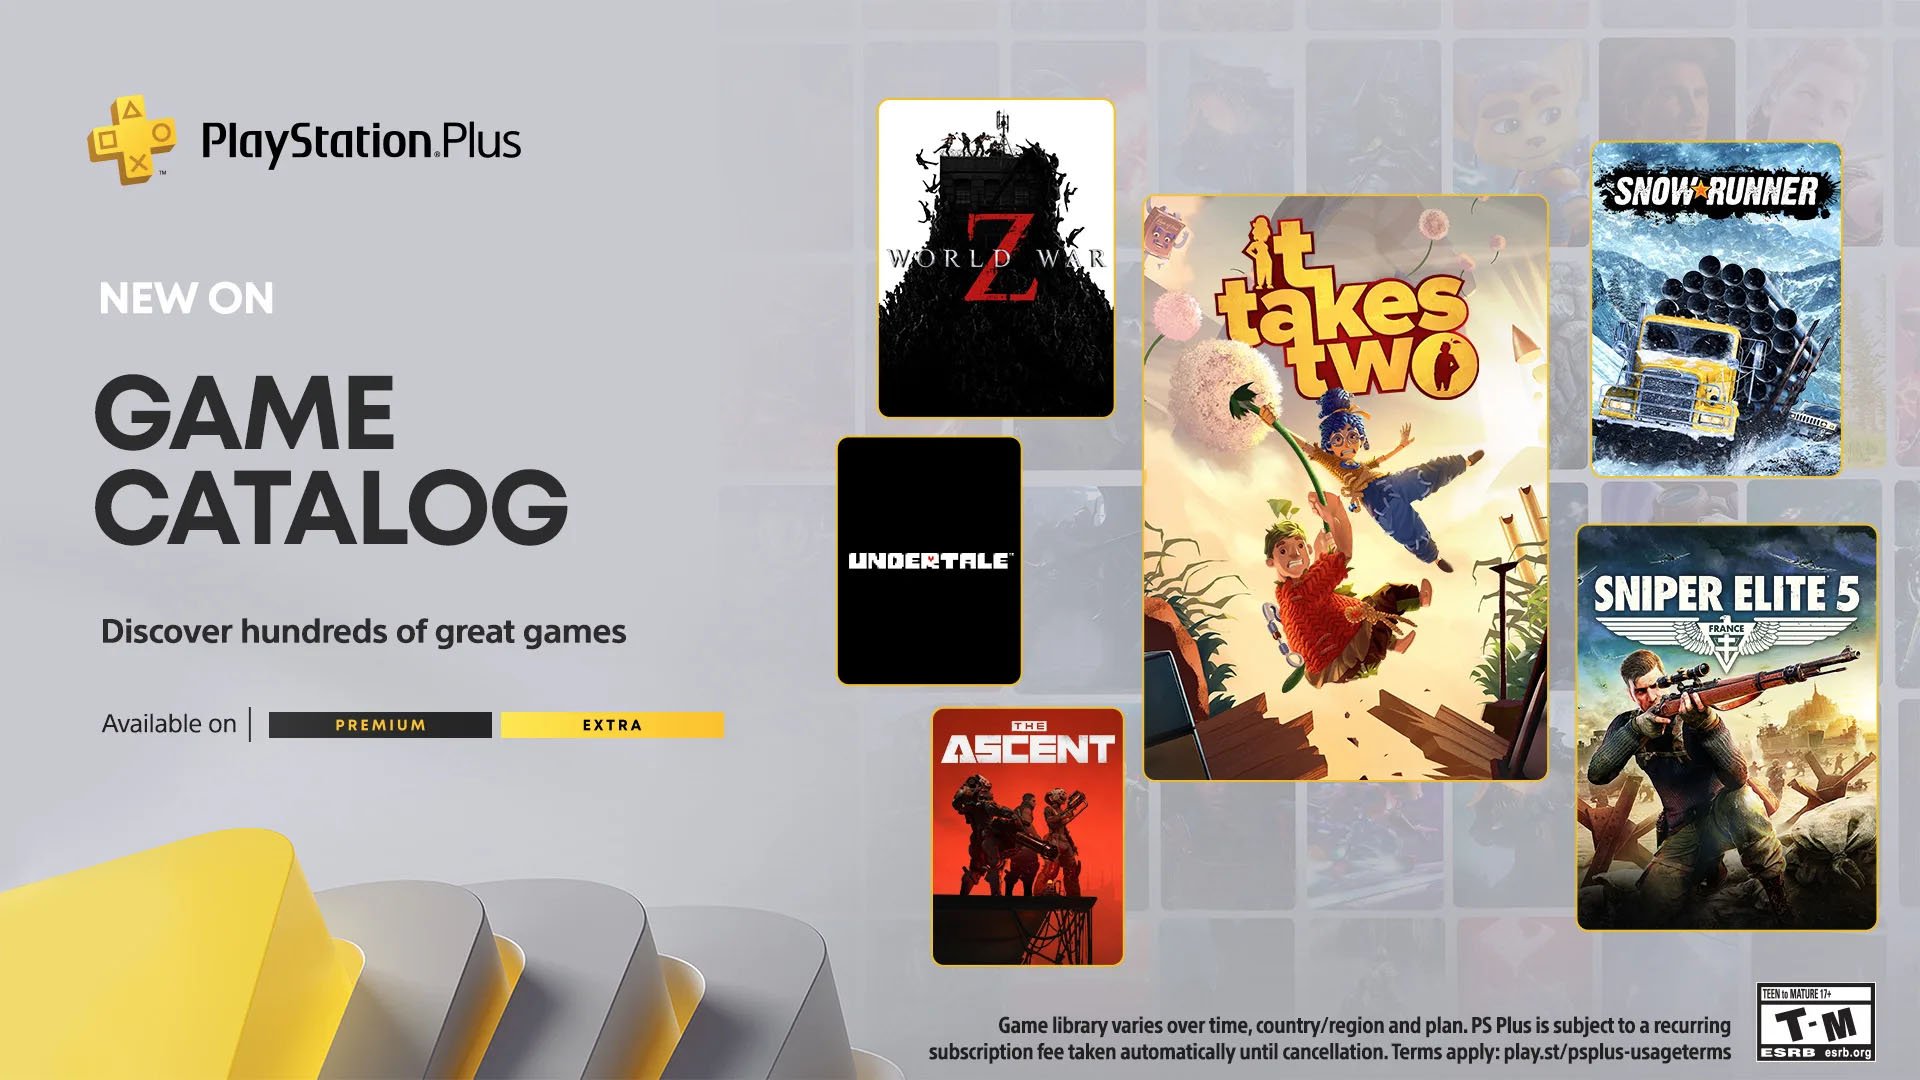 A comparison of availability of the new PS Plus game catalogs